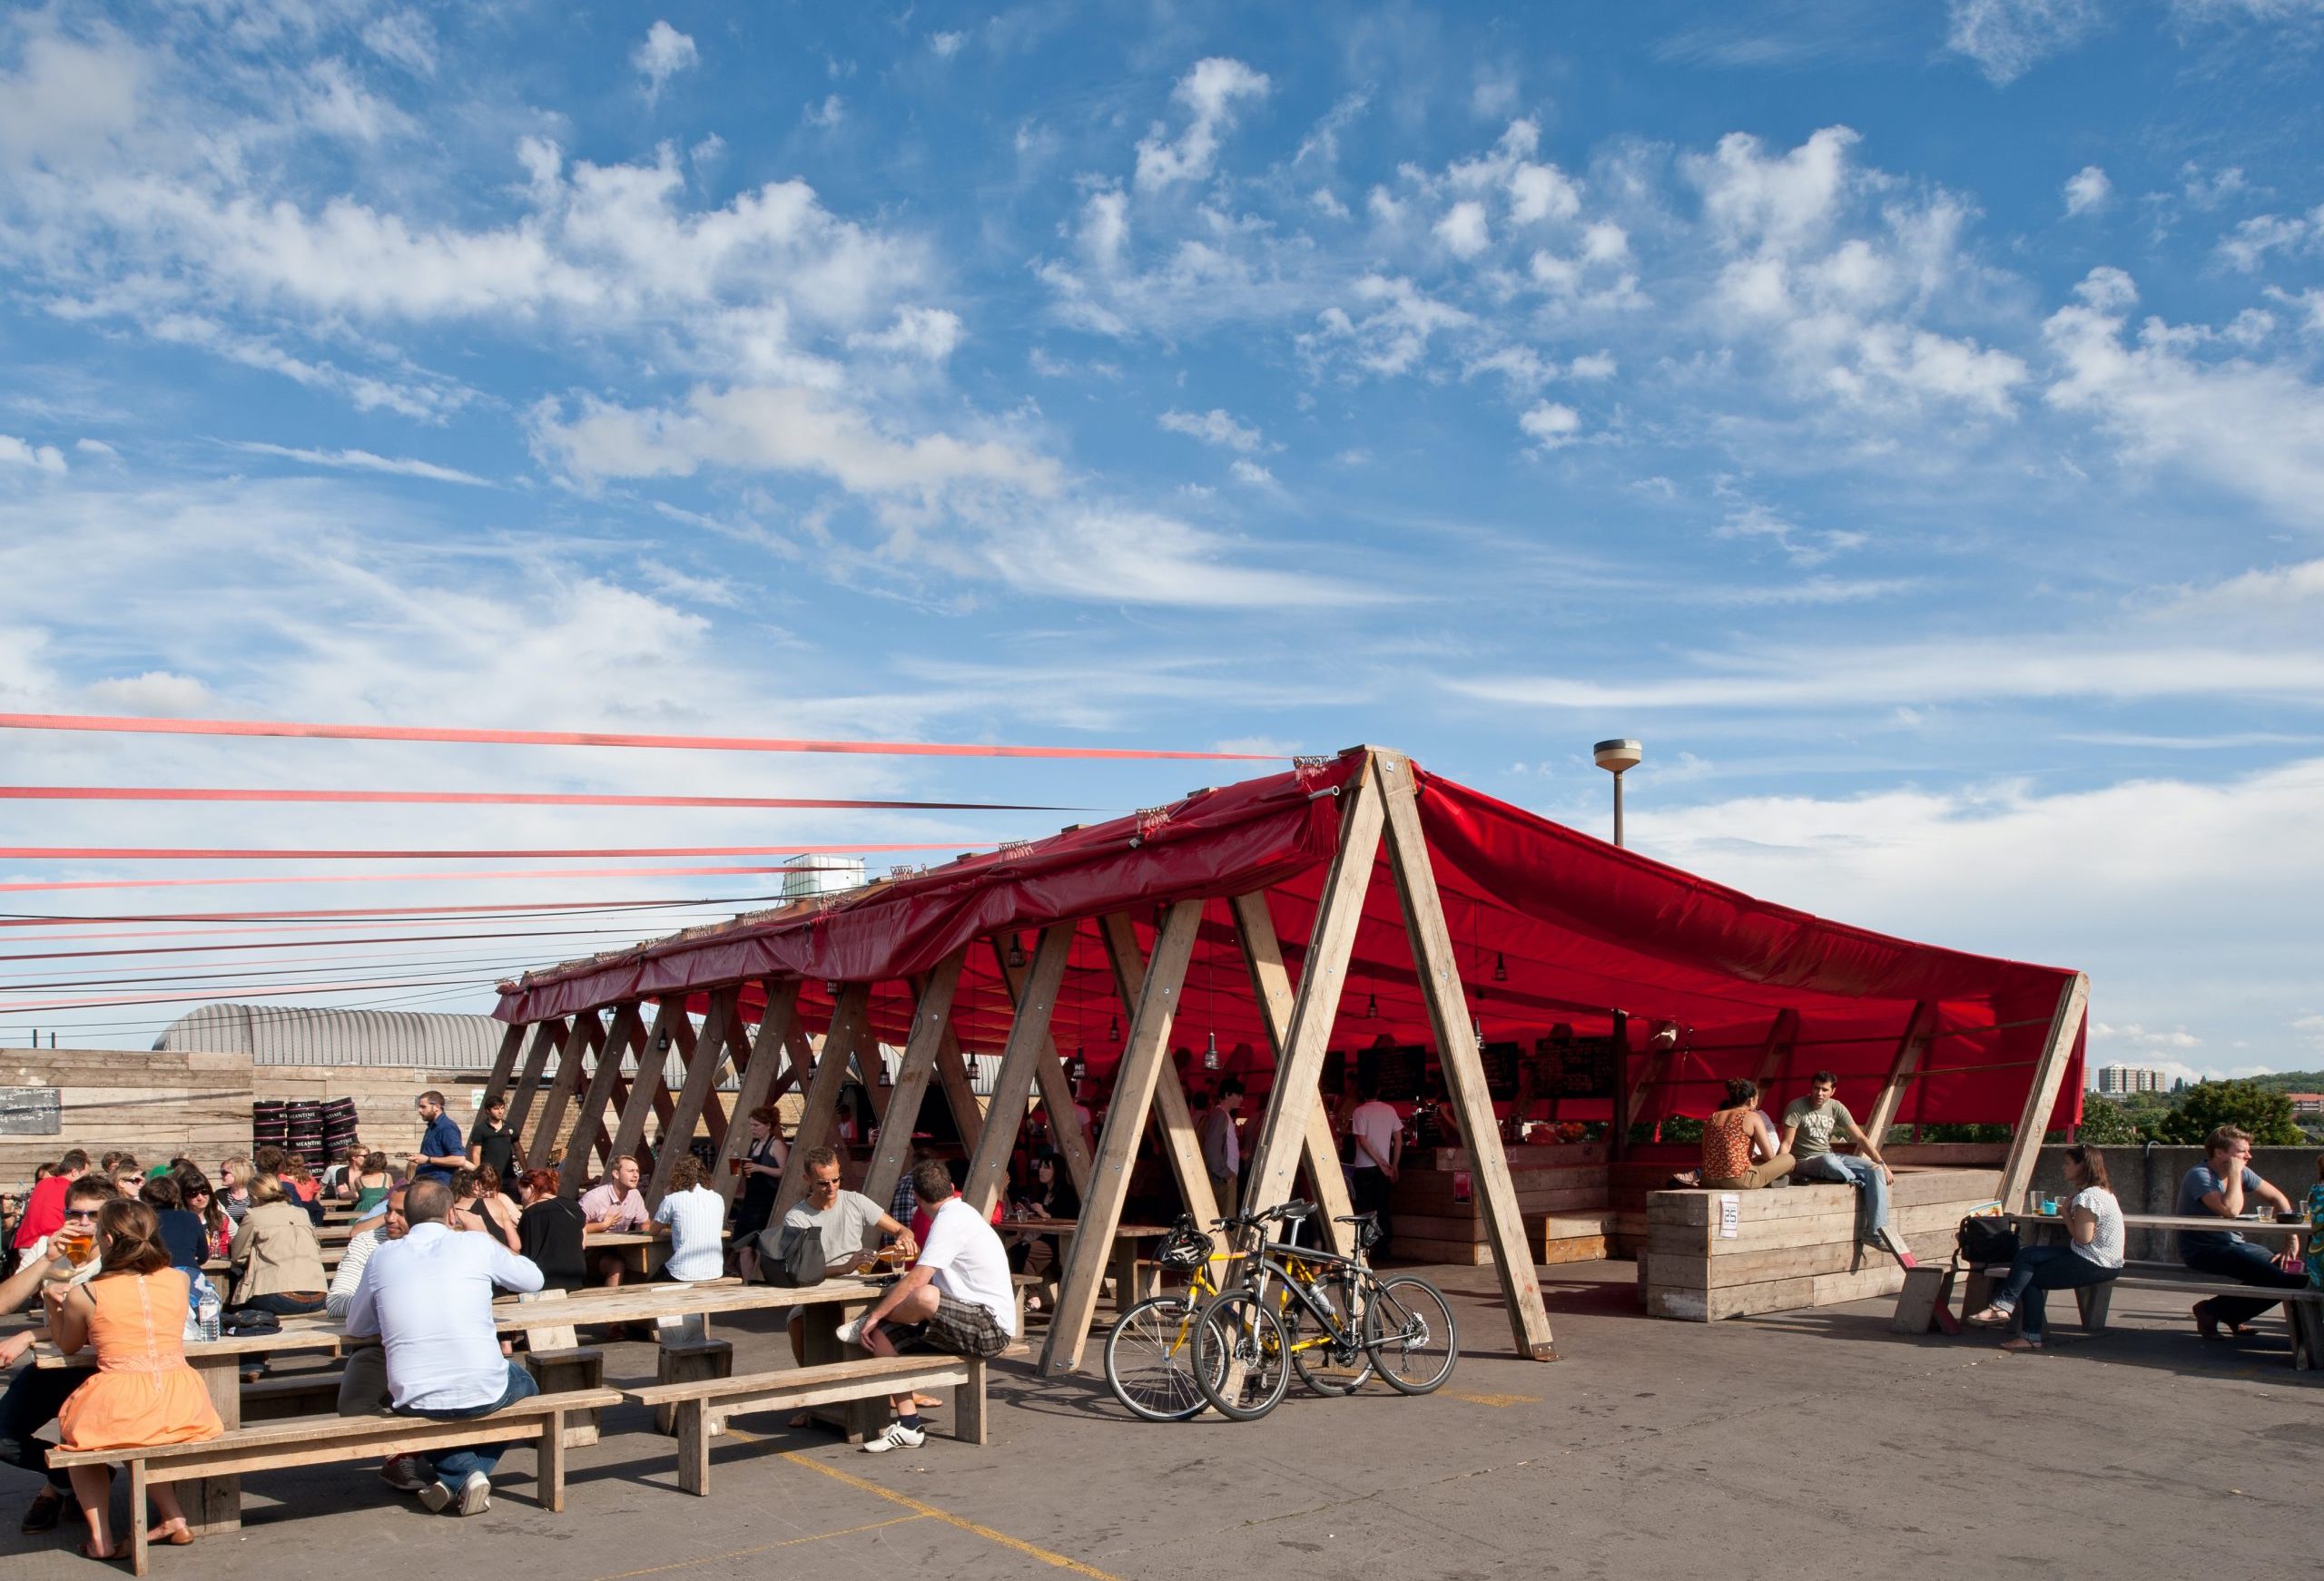 ID: a large wooden A-frame is used to support a large red canopy over a rooftop cafe and restaurant. People are seen sitting on tables in the foreground and enjoying refreshments.